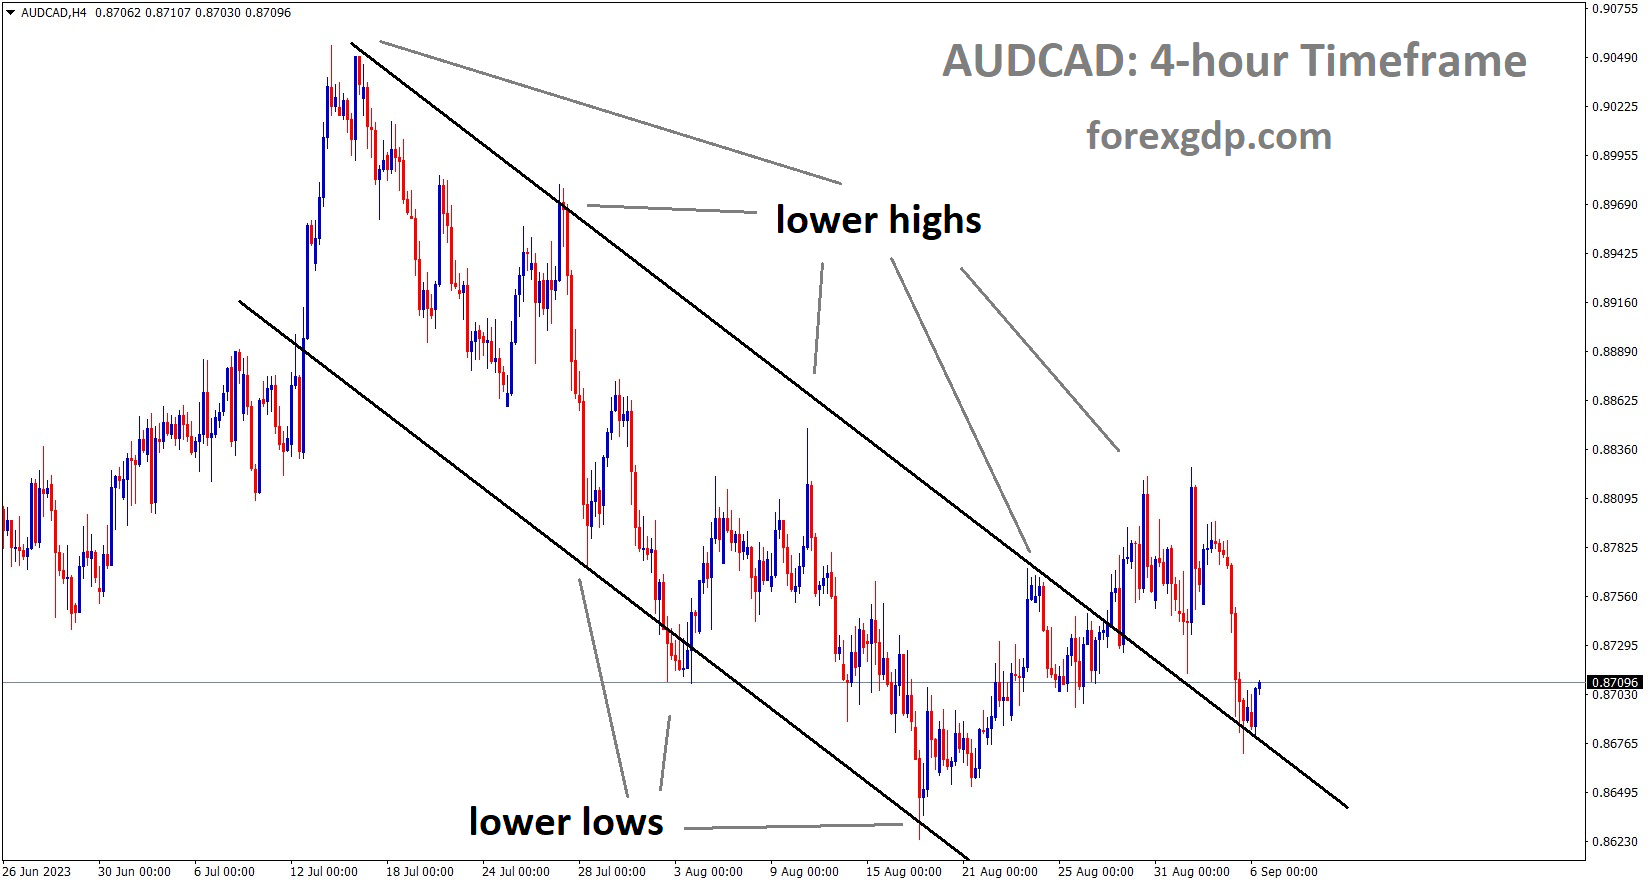 AUDCAD H4 TF Analysis Market is moving in the Descending channel and the market has reached the lower high area of the channel